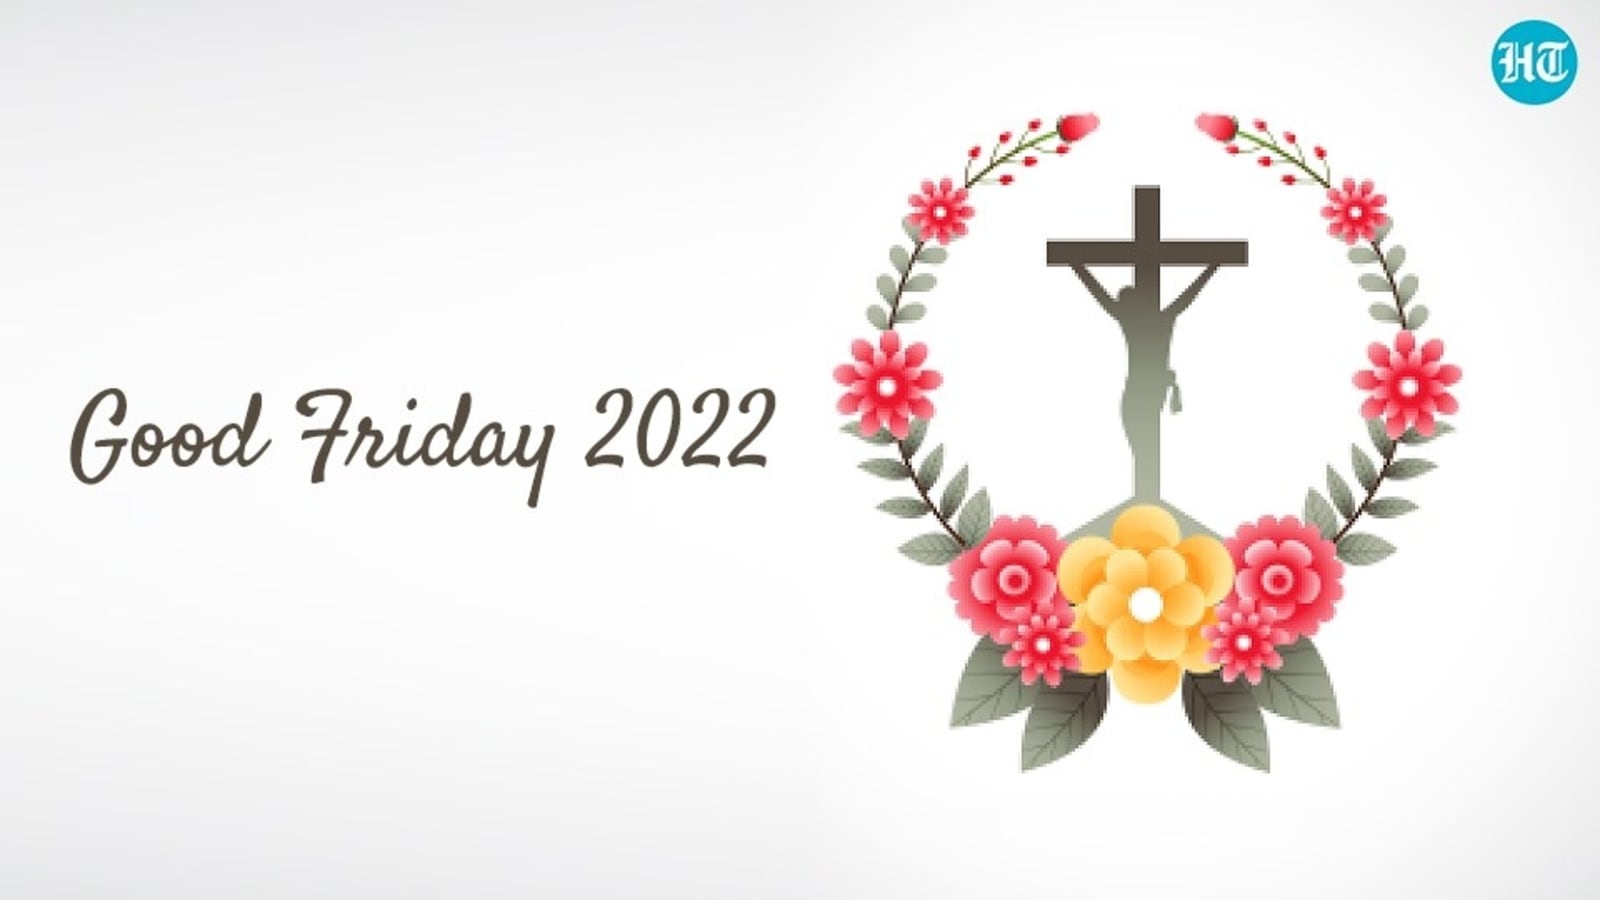 Good Friday 2022: Wishes, images and messages to share with your ...